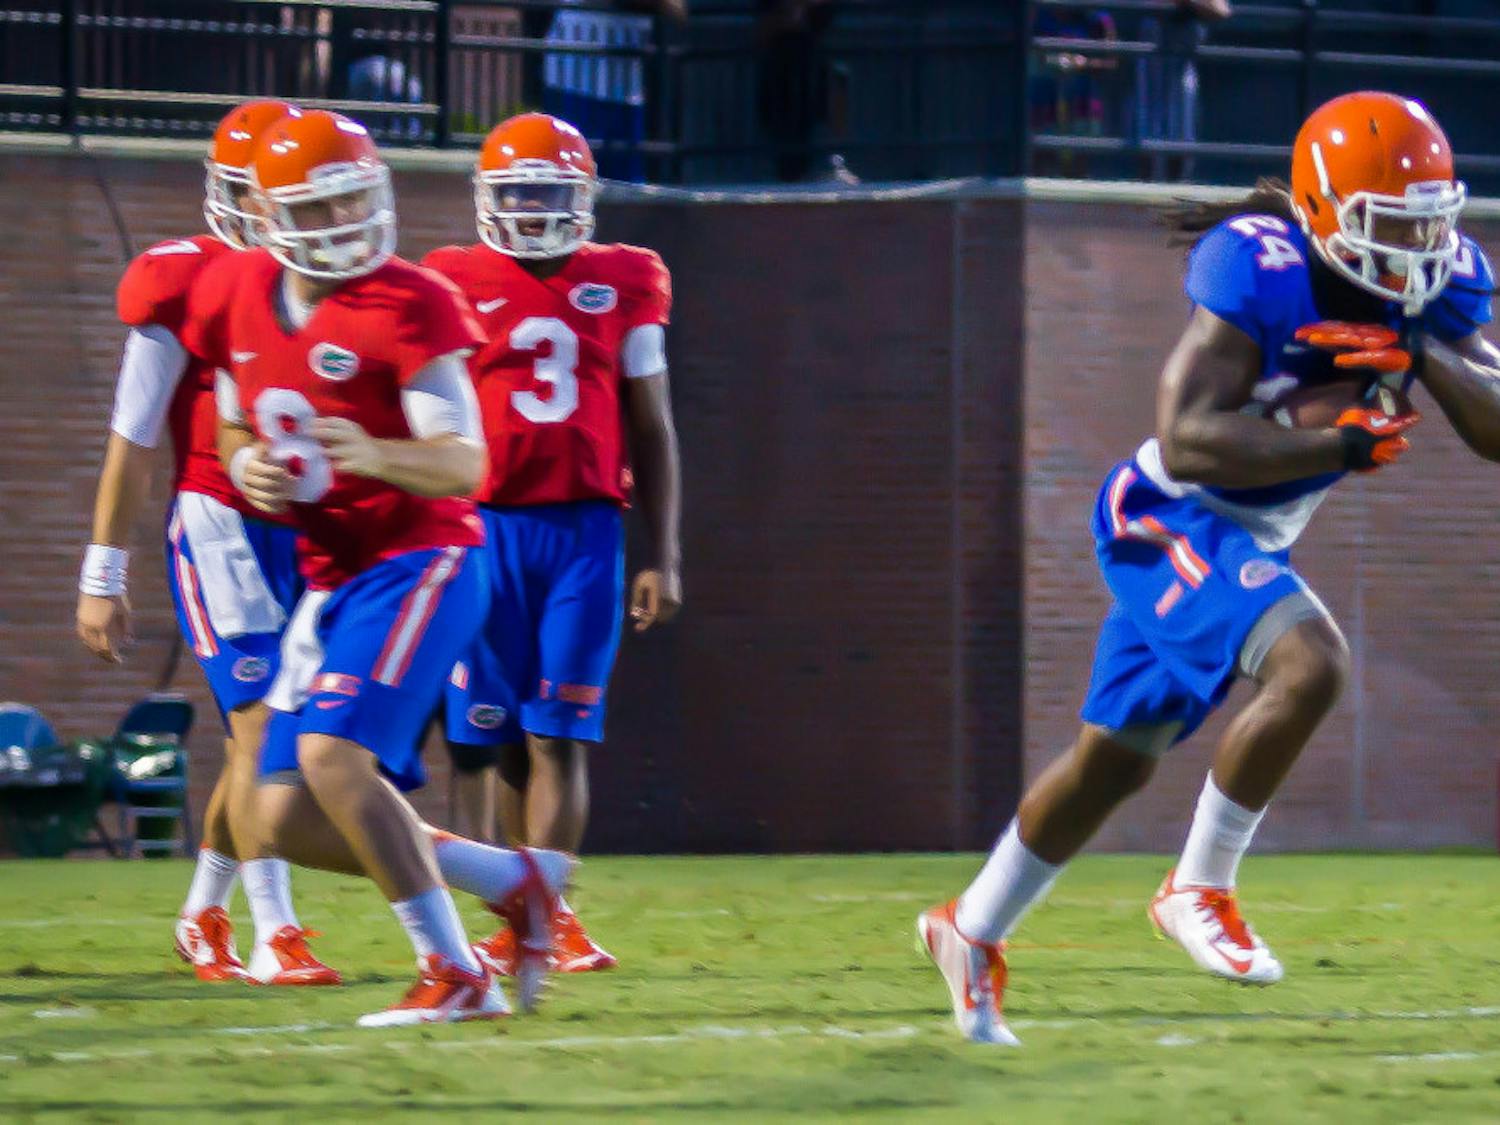 Skyler Mornhinweg (8) hands the ball off to Matt Jones (24) as Will Grier (7) and Treon Harris (3) look on during Florida's open practice on Aug. 8, 2014 at Donald R. Dizney Stadium. Head coach Jim McElwain revealed Wednesday that Mornhinweg would be transferring from Florida.